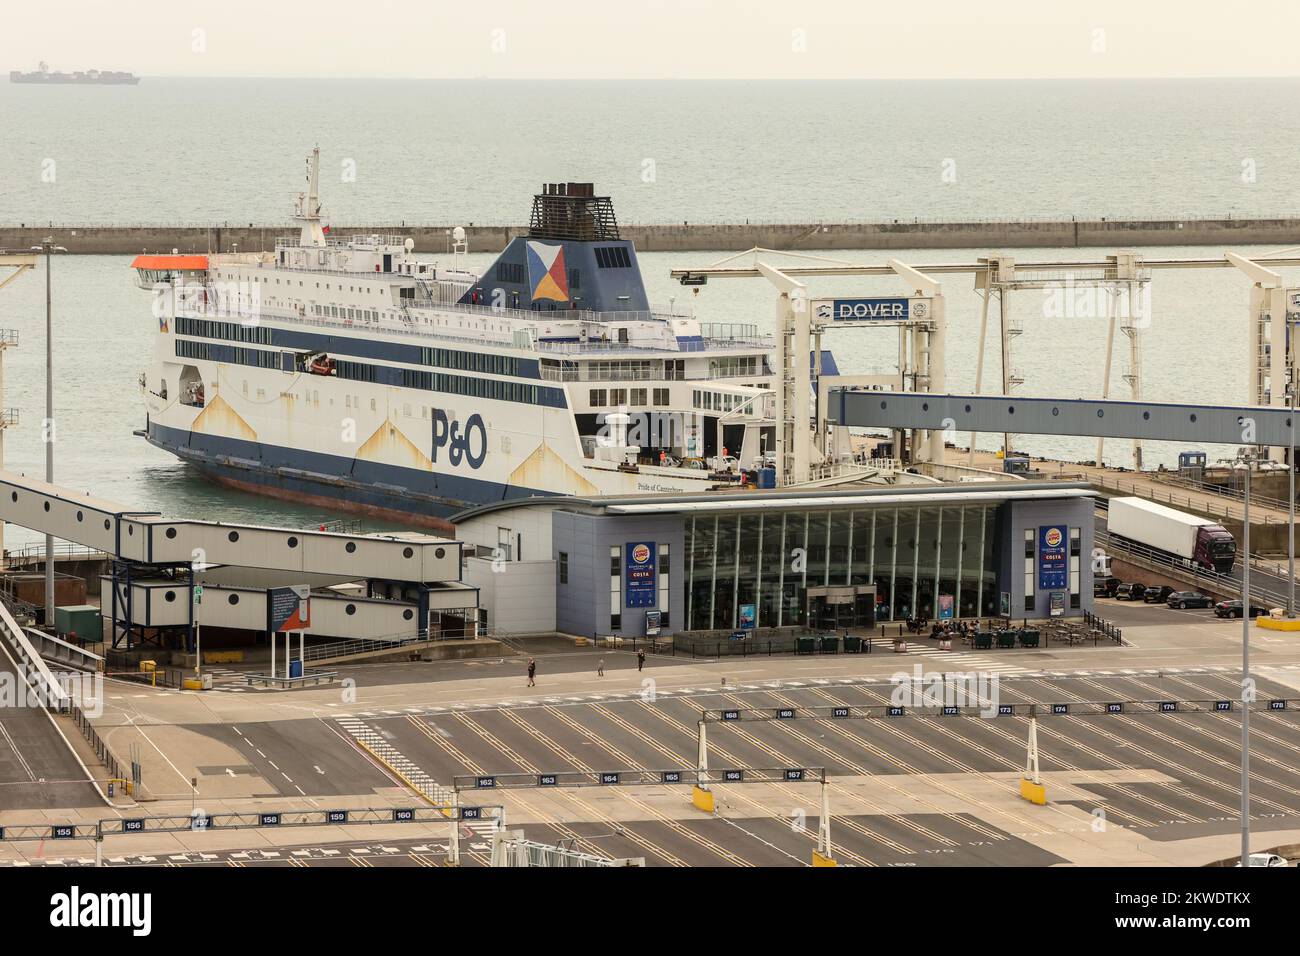 P&O ferries,ferry,moored,docked,at,Port of Dover,sailing,from,Dover,to,Calais,France,at,Dover,town,Kent,White cliffs,White Cliffs of Dover,overlooking,Dover Port,Kent,England,English,coast,coastline,Kent,GB,Great Britain,Britain,British,UK,United Kingdom,Europe,European,August,summer, Stock Photo